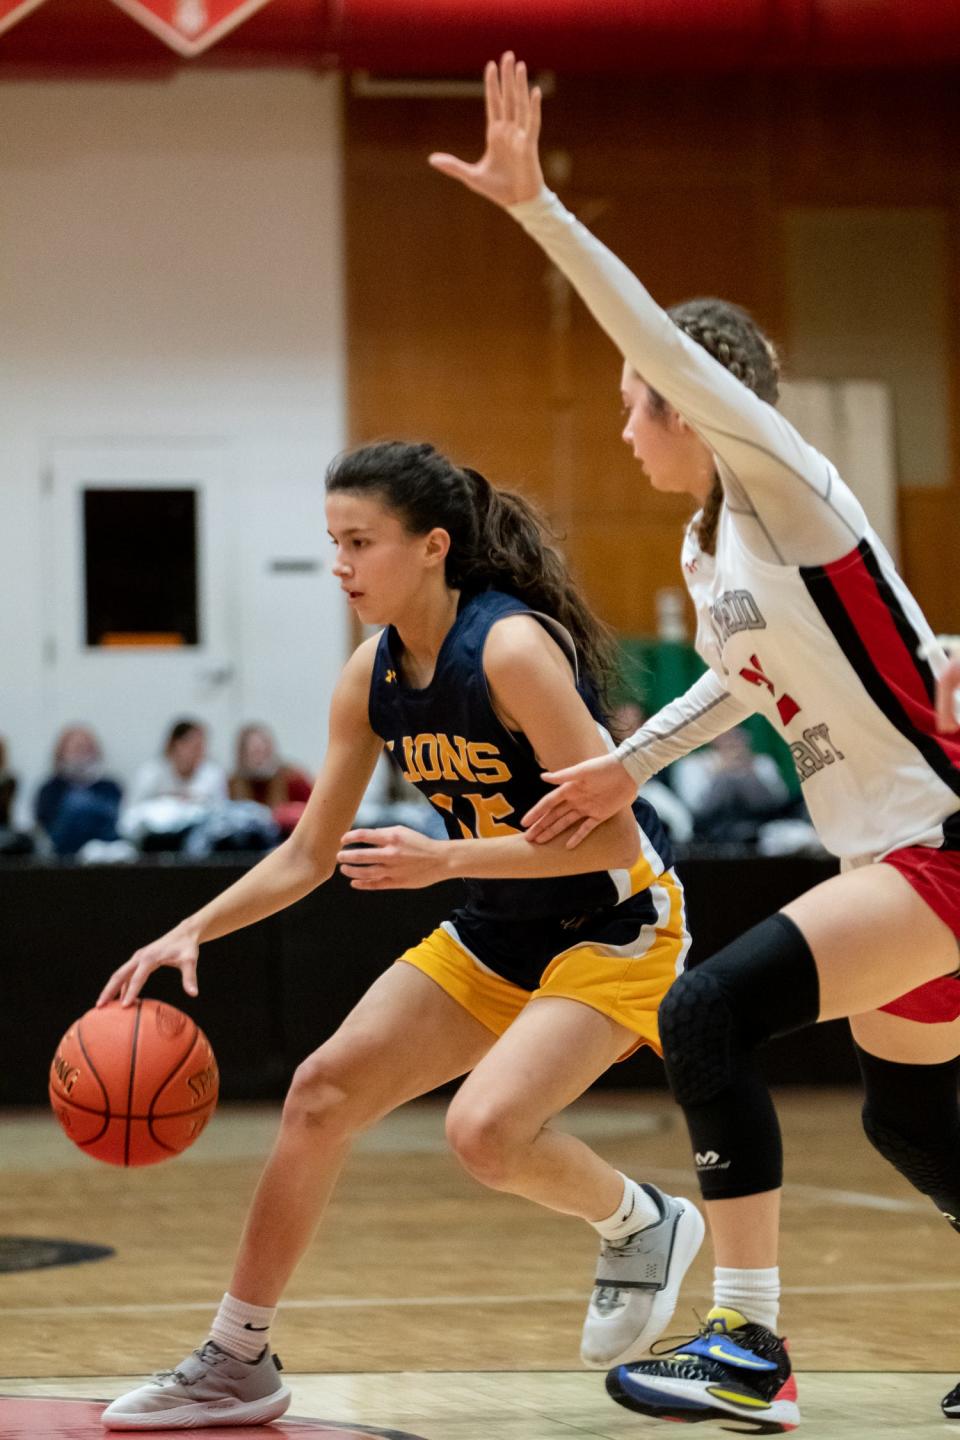 New Hope-Solebury's Izzy Elizondo dribbles while covered by Gwynedd Mercy's Sofia Coleman in a District One Class 4A semifinal game, on Tuesday, February 22, 2022, at Gwynedd Mercy Academy High School in Lower Gwynedd. The Monarchs advance to the title game after defeating the Lions 56-28.